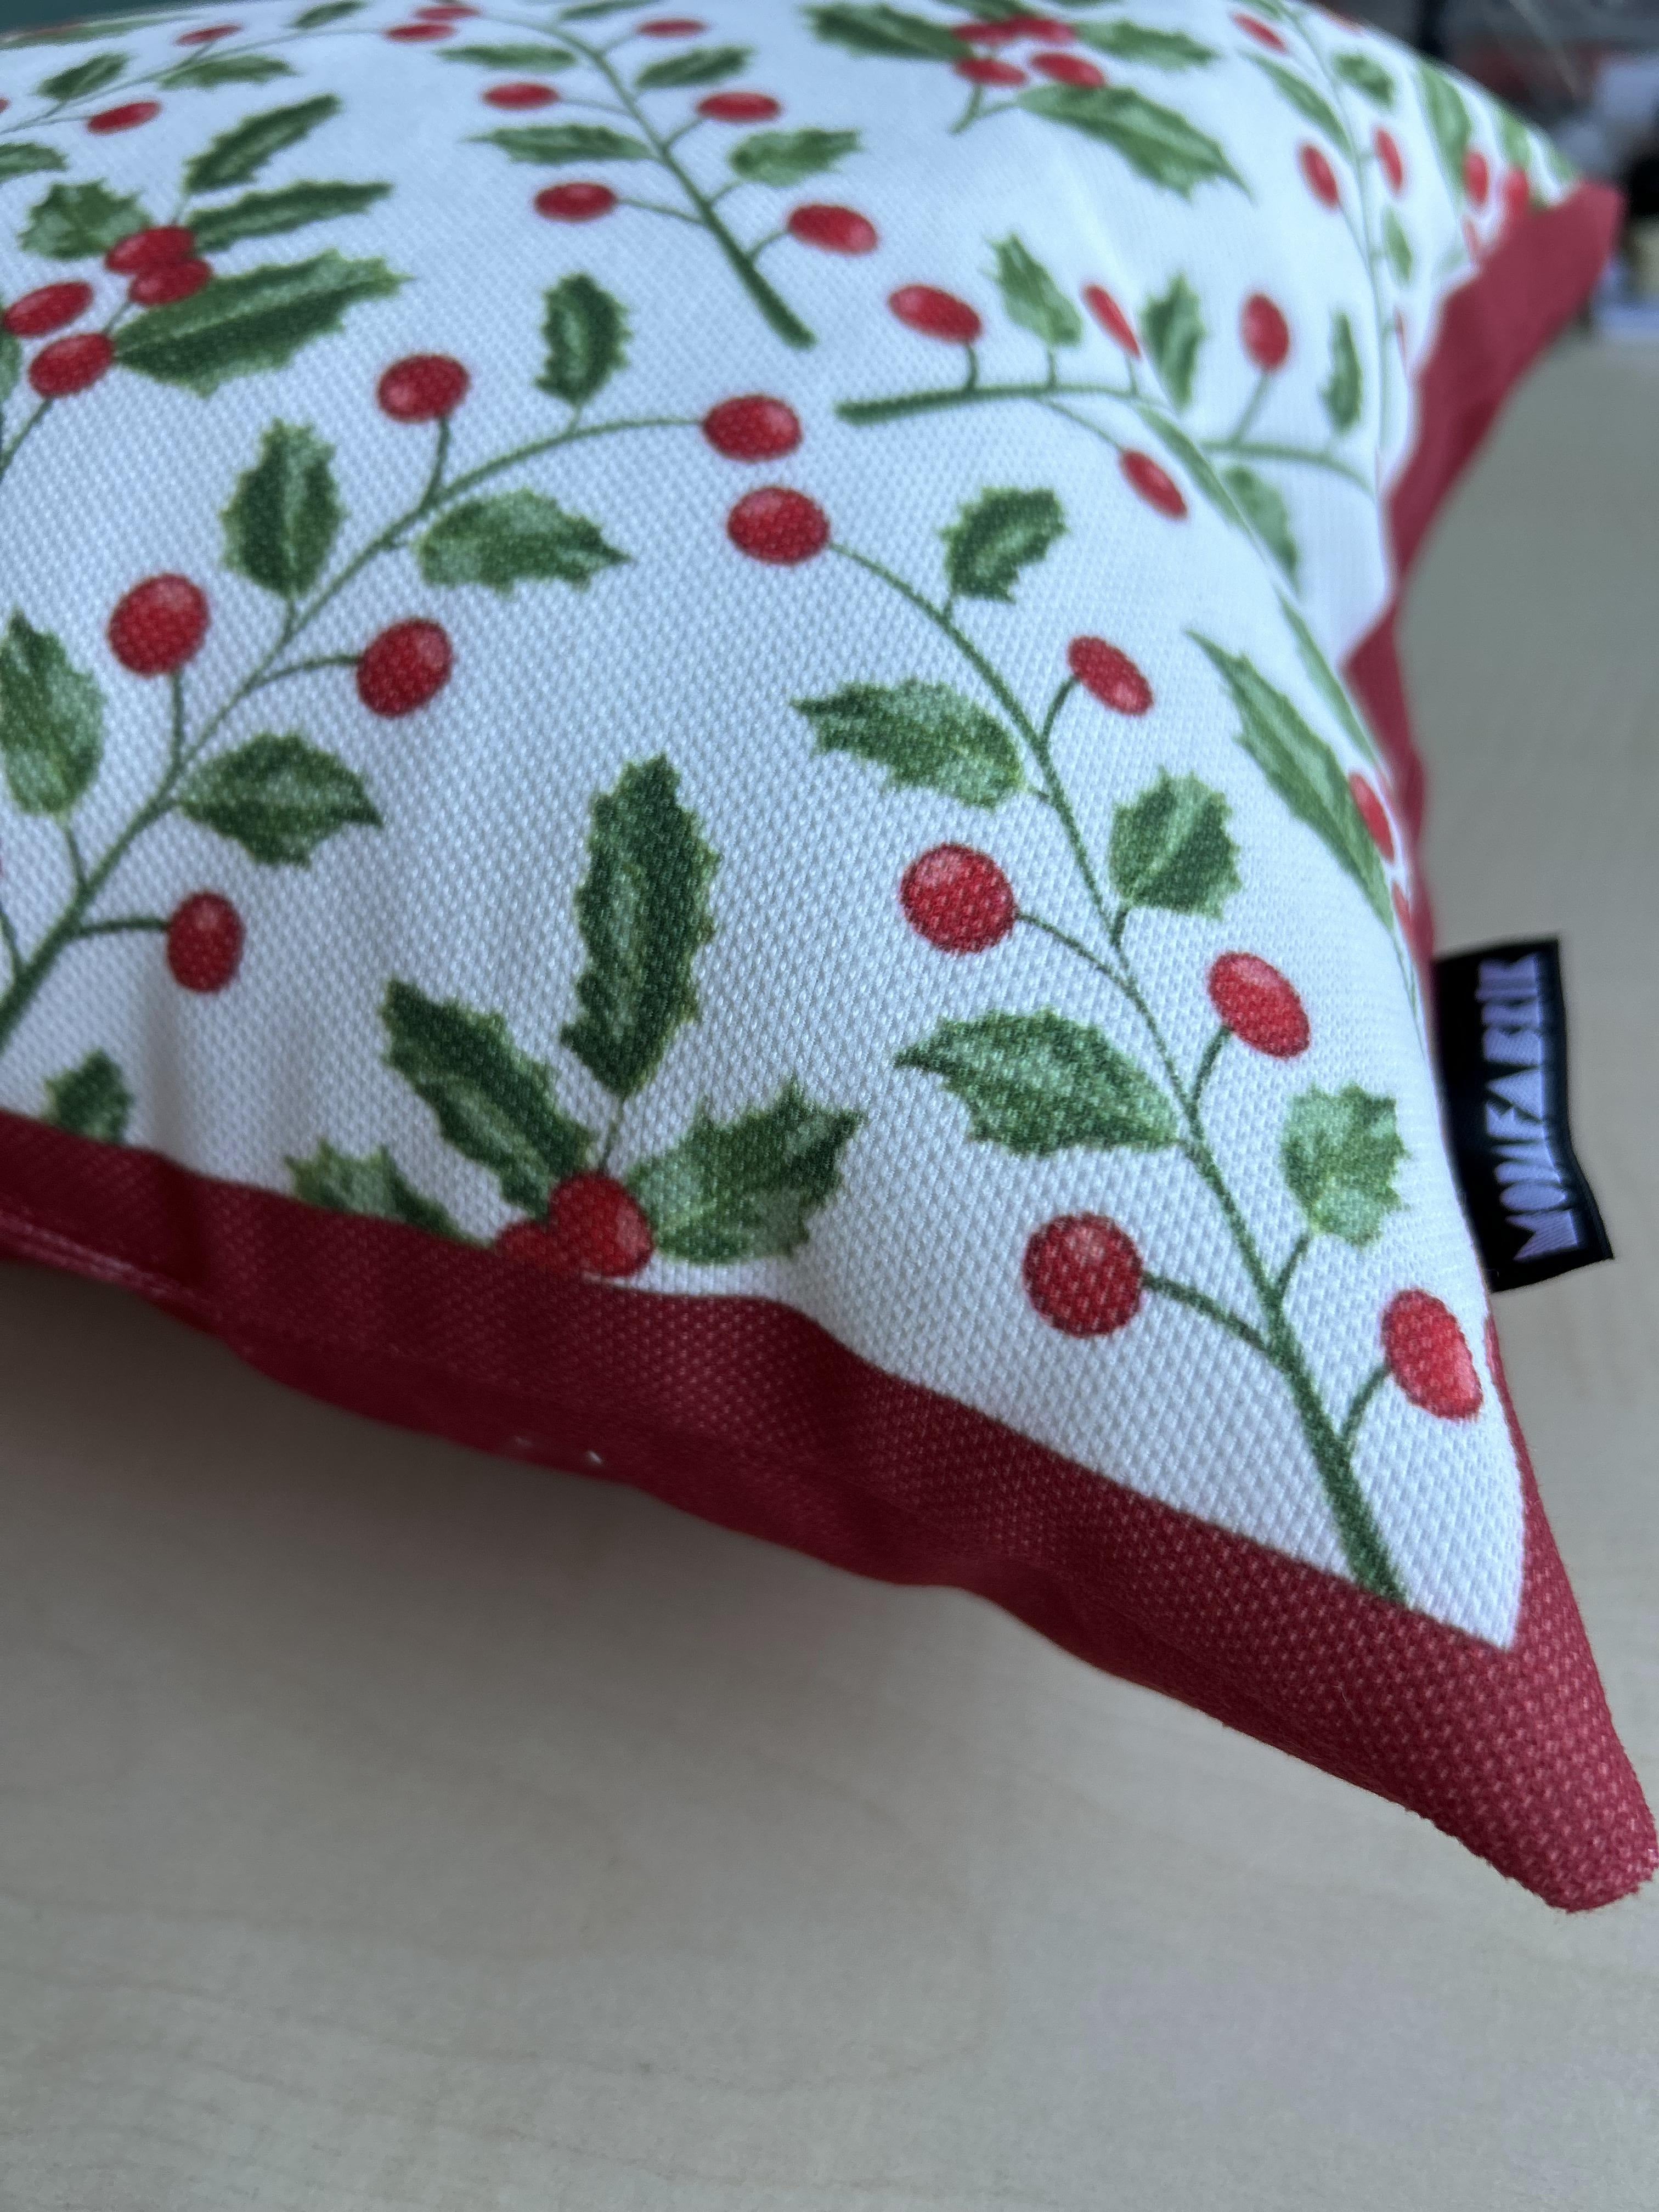 Holly Branch and Berries Pillow Cover, Rectangular, 18 1/2L x 13" W - Wear Sierra